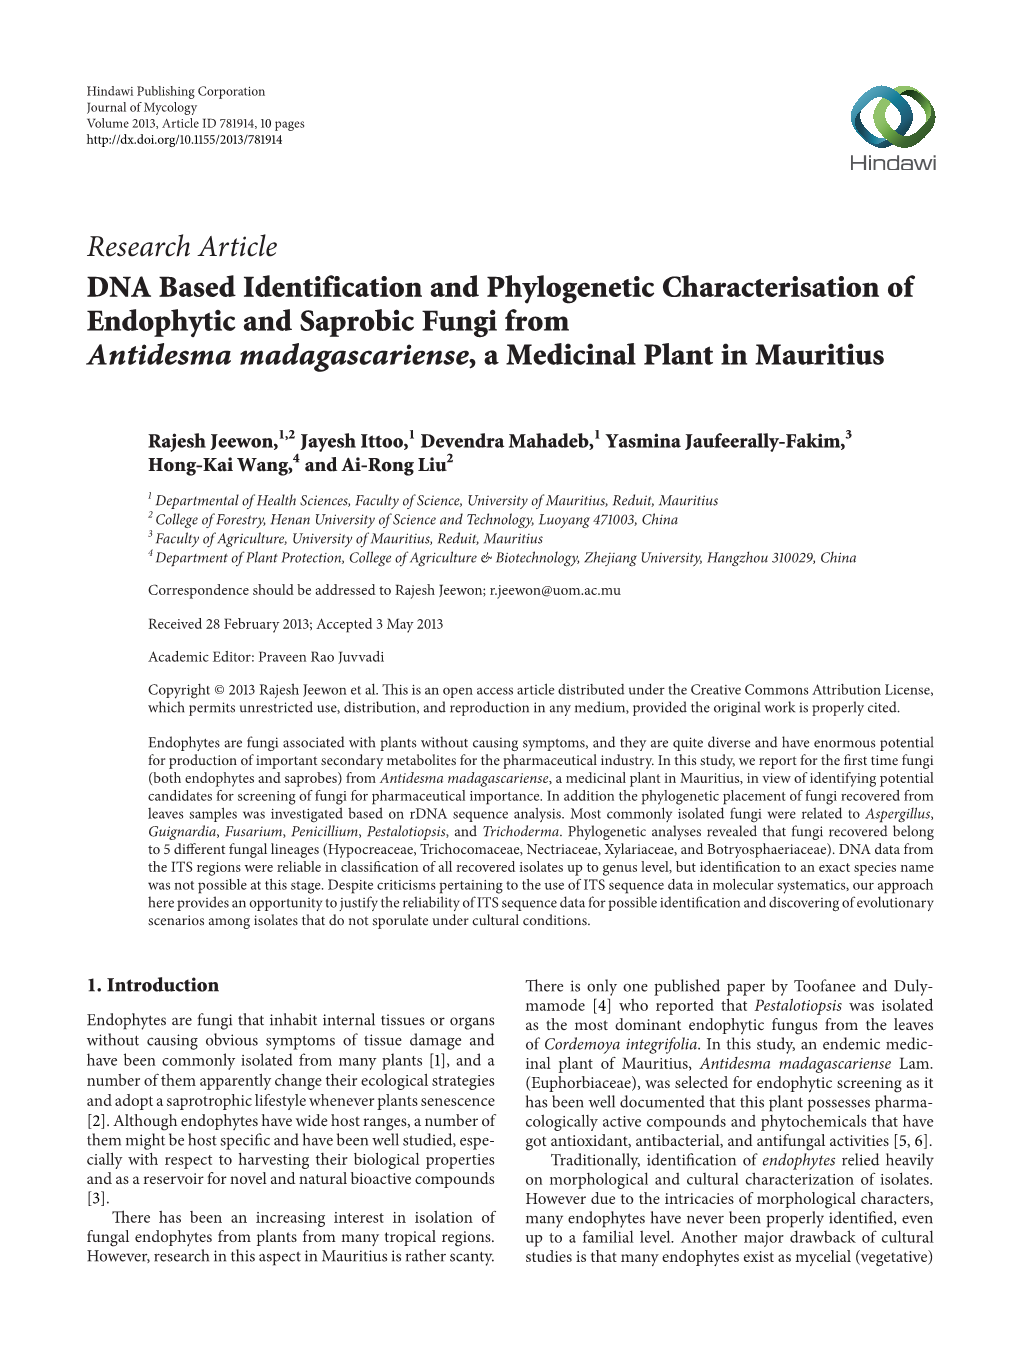 DNA Based Identification and Phylogenetic Characterisation of Endophytic and Saprobic Fungi from Antidesma Madagascariense, a Medicinal Plant in Mauritius